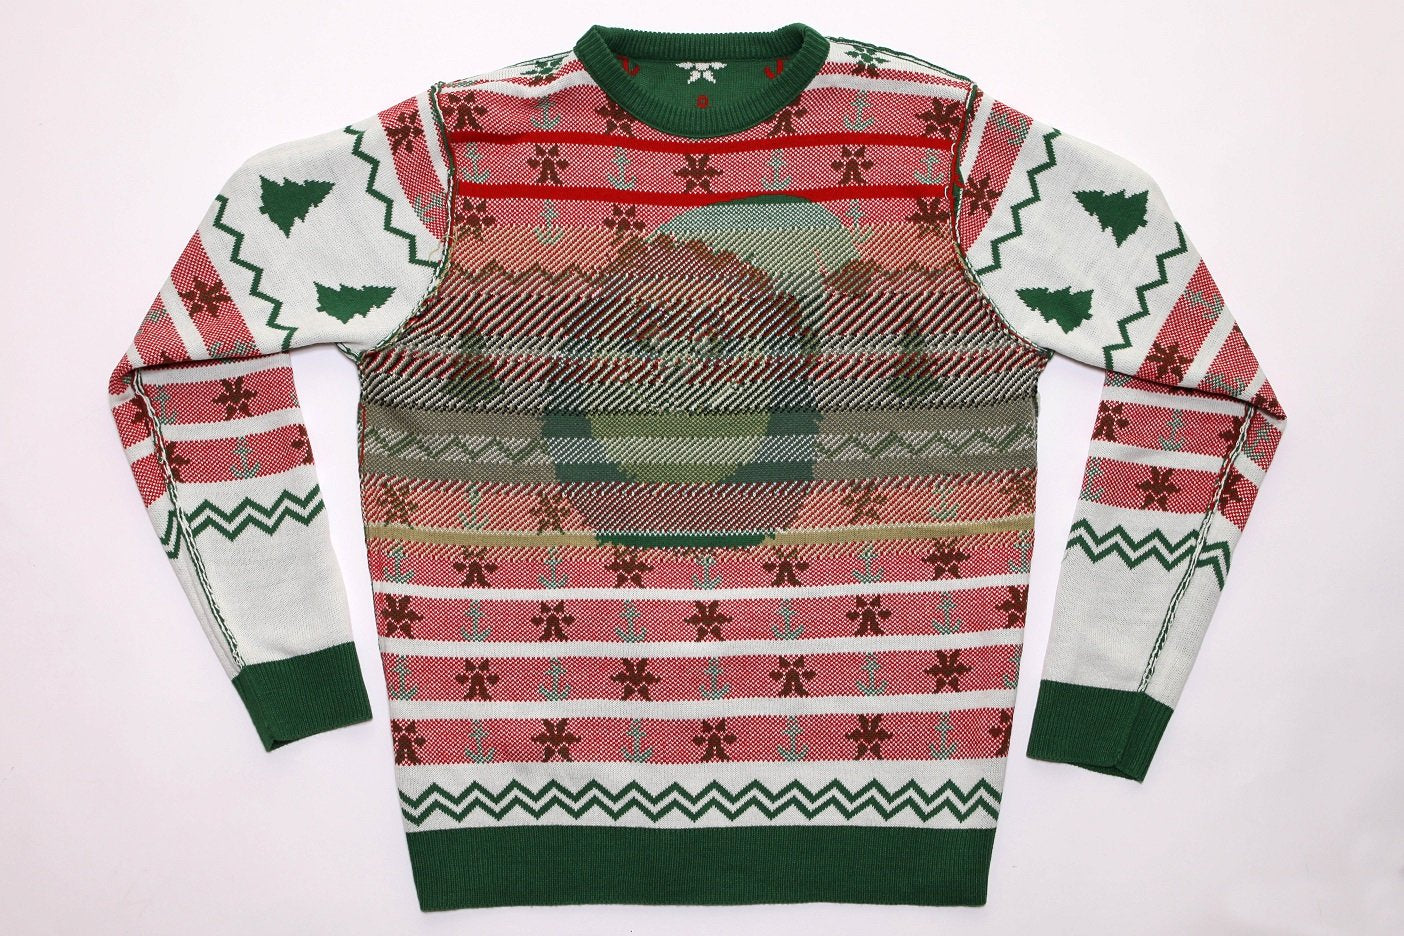 An image of the insude of an ugly sweater